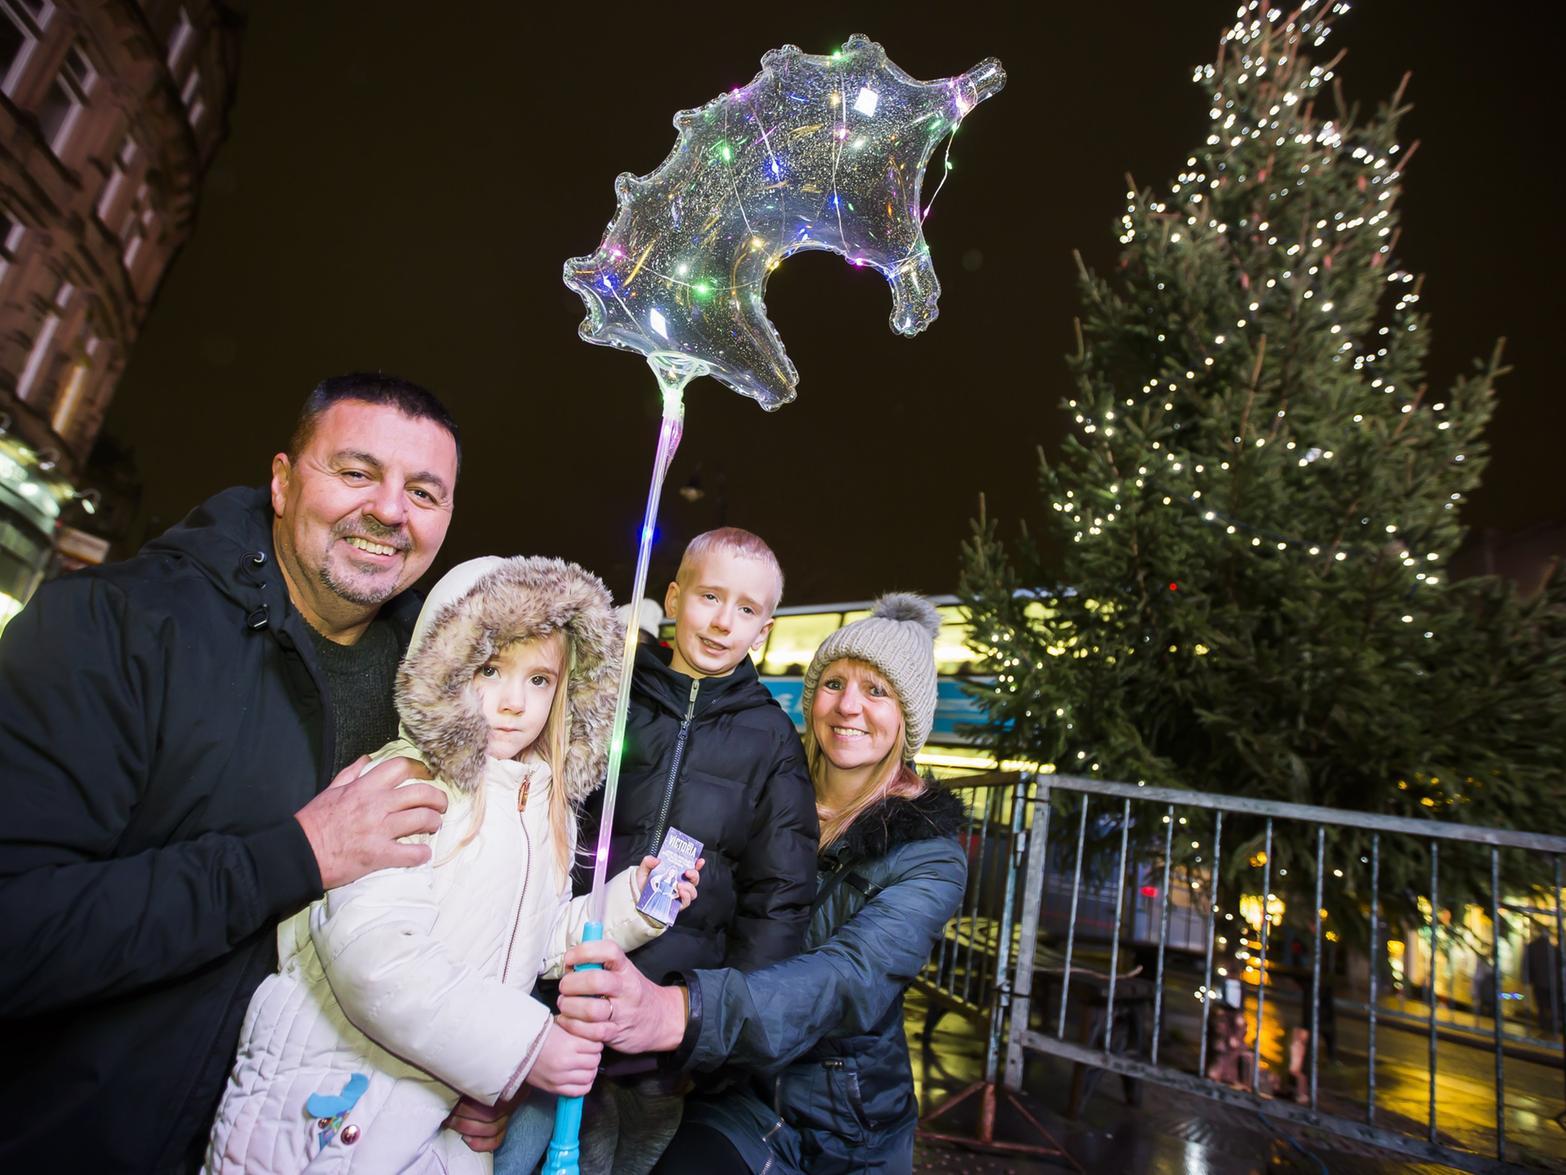 Halifax Christmas lights switch-on. From the left, Keith Waterworth, Violet McNeish, four, Riley McNeish, seven, and Sally Smith.